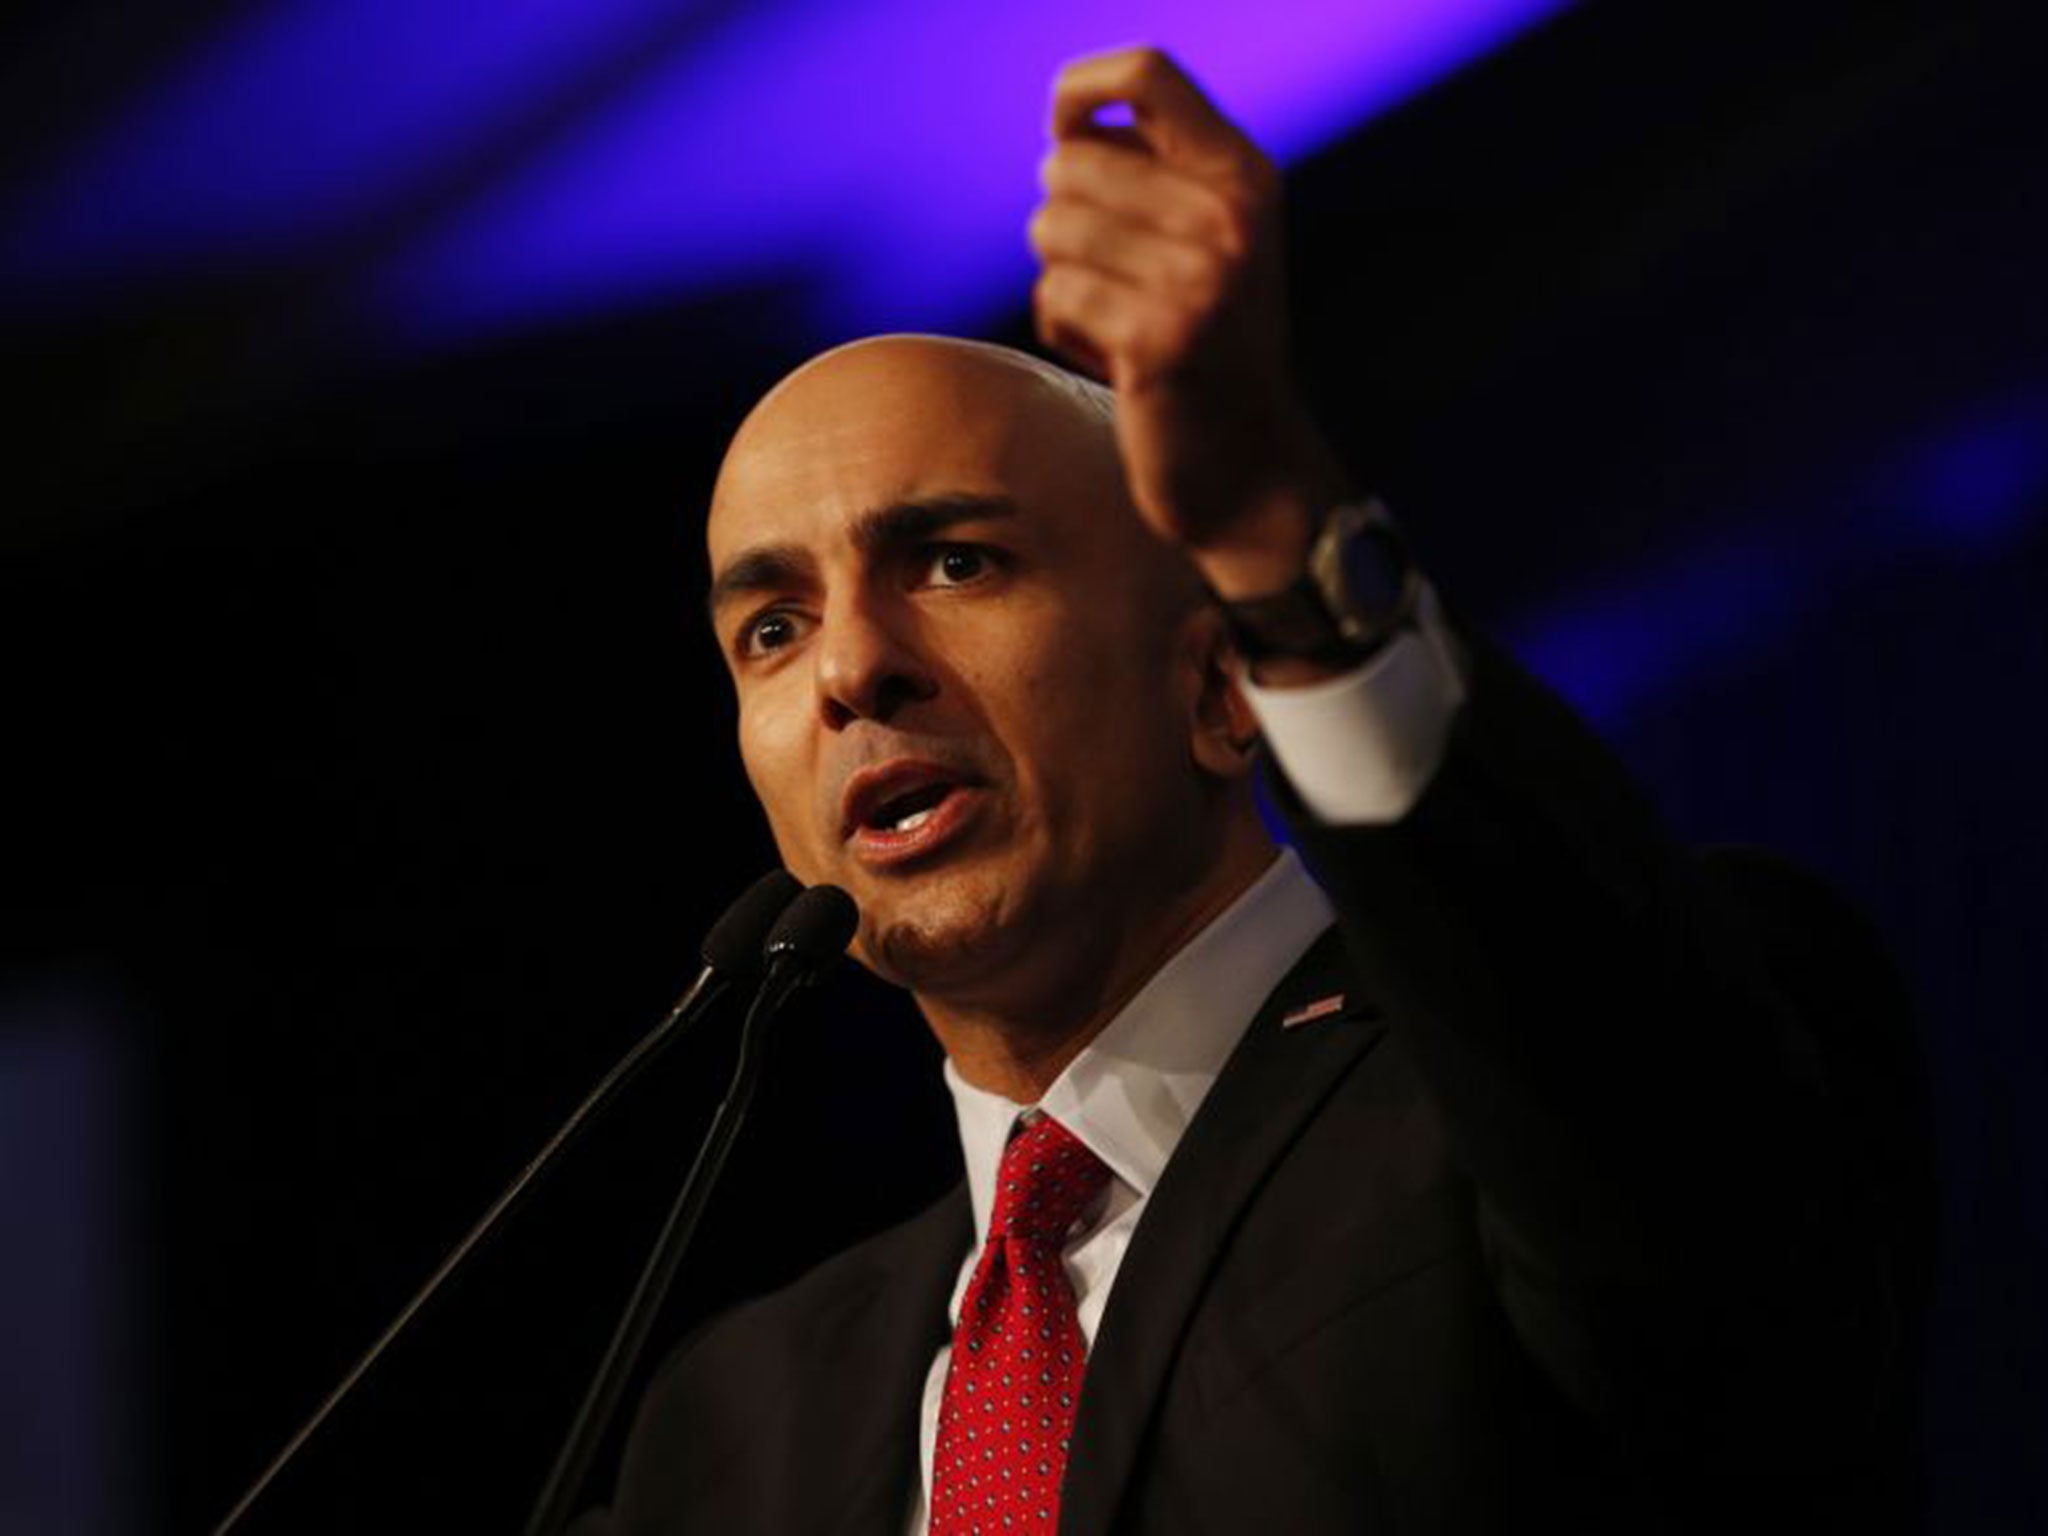 Neel Kashkari was recently appointed chairman of the Federal Reserve Bank of Minneapolis